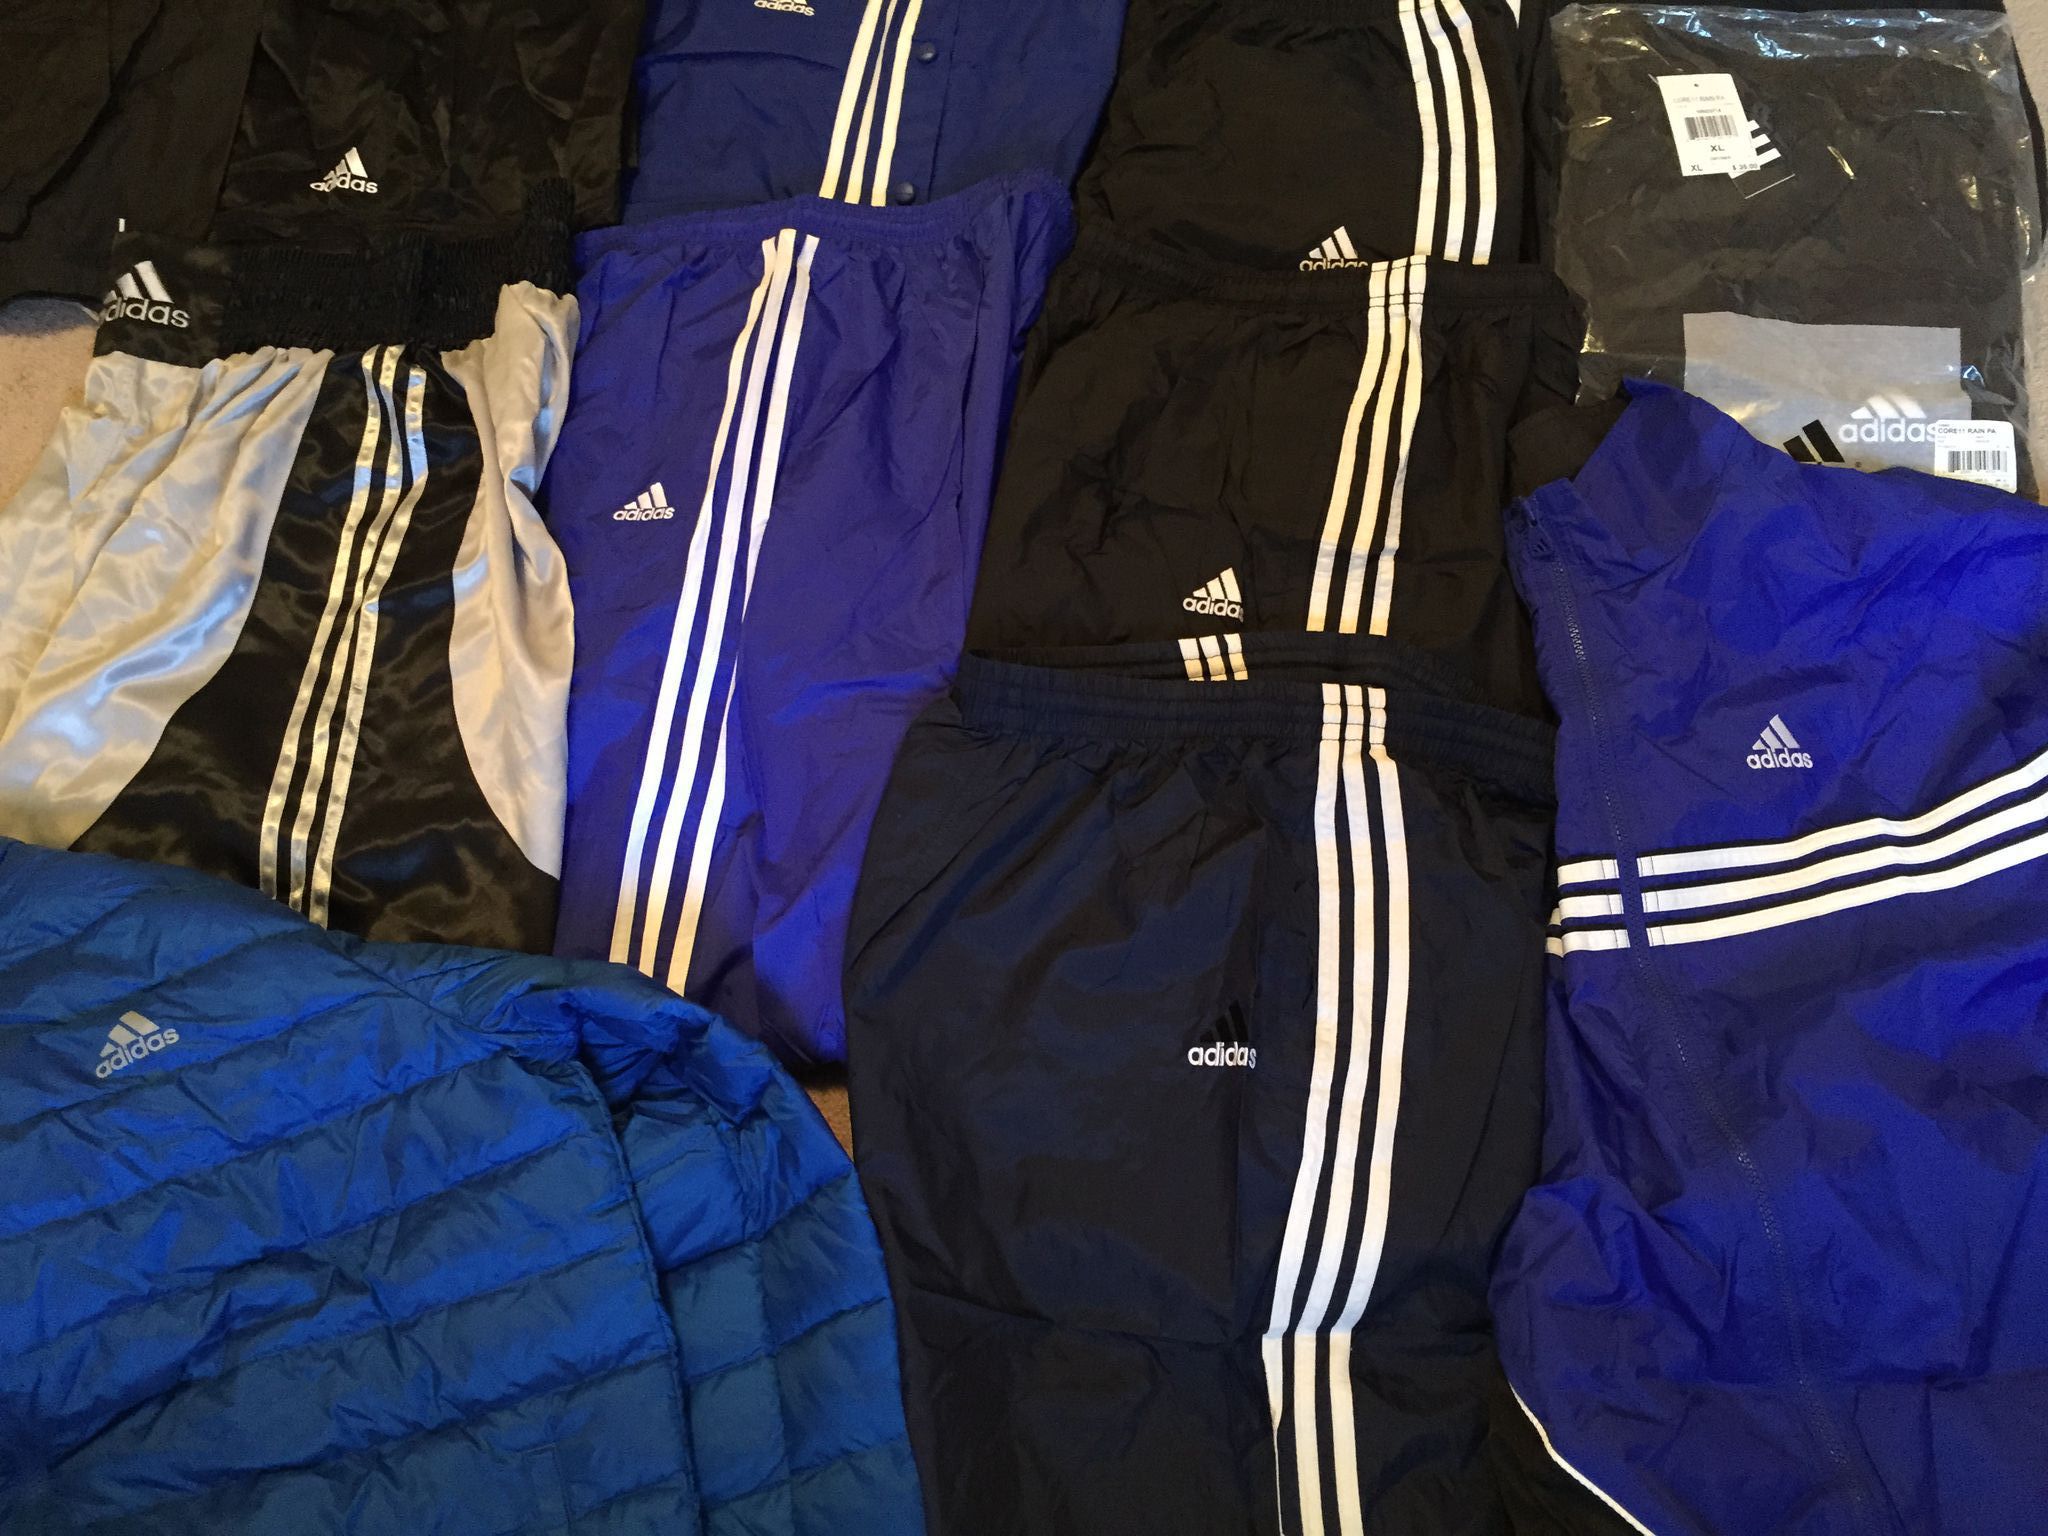 A little more Adidas-centric